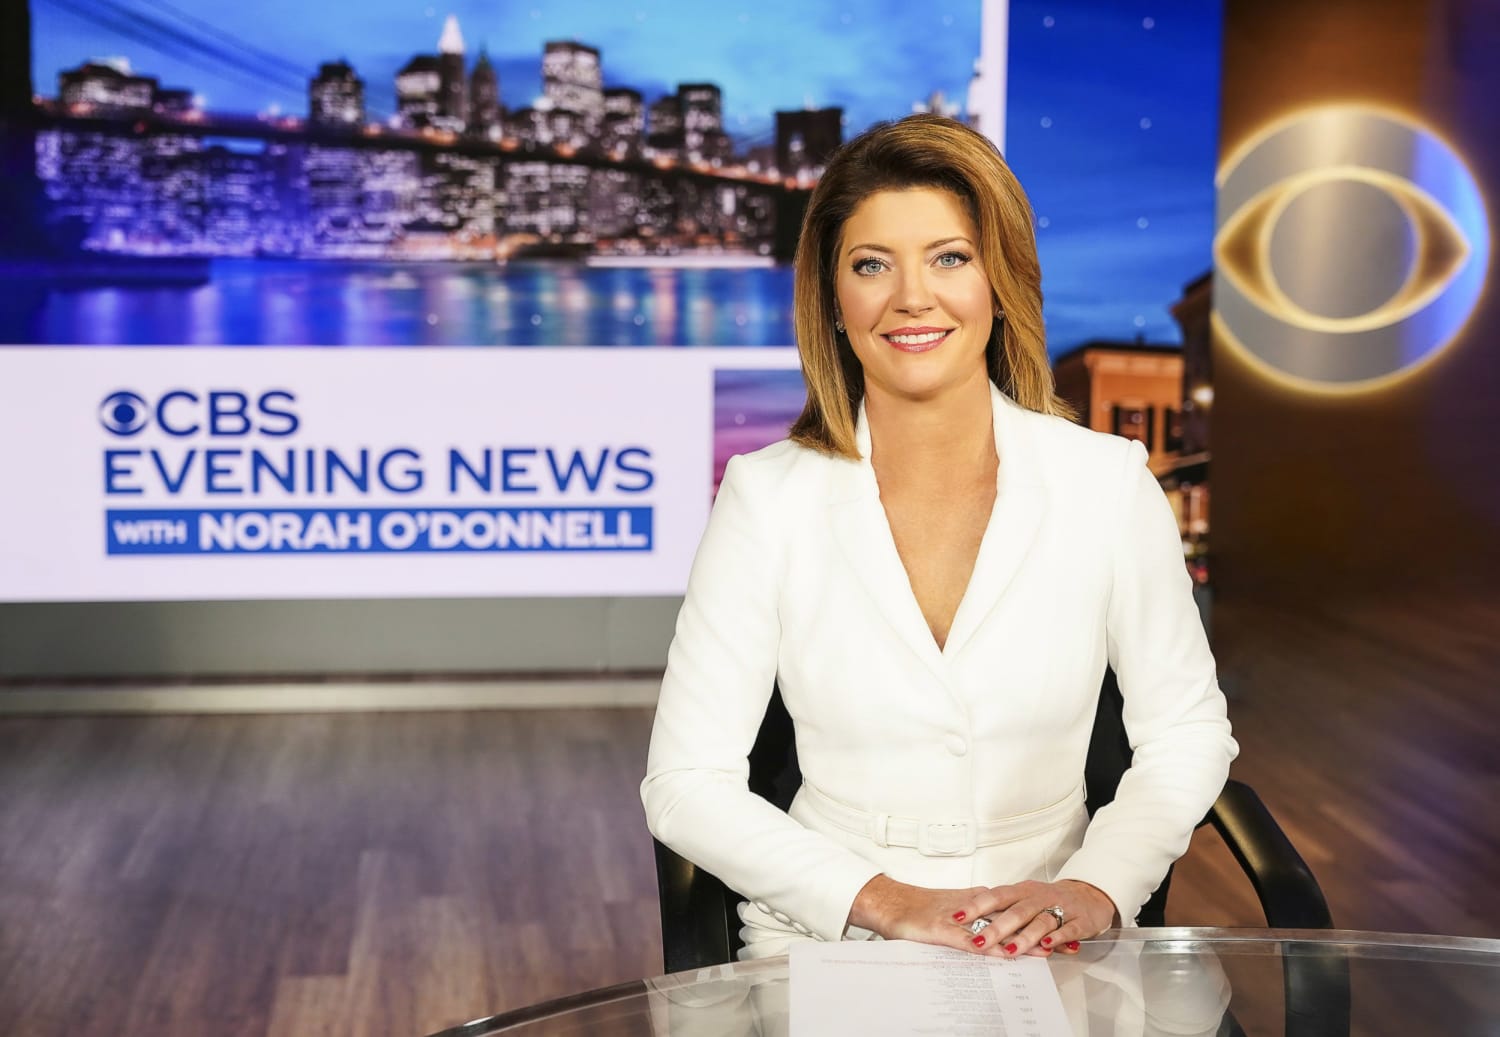 Norah o'donnell nudes